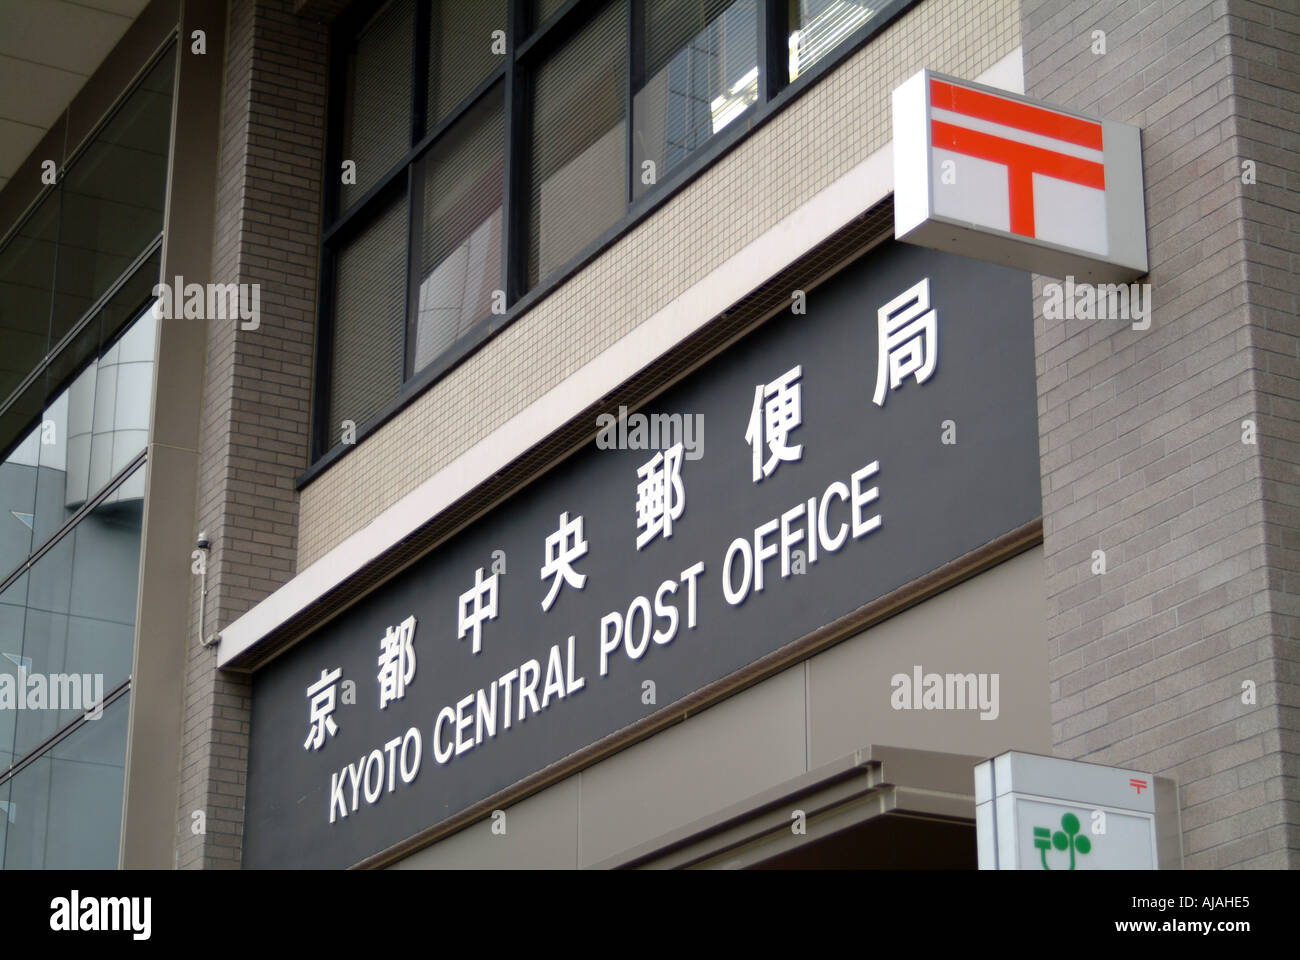 Kyoto Central Post Office Japan Stock Photo - Alamy